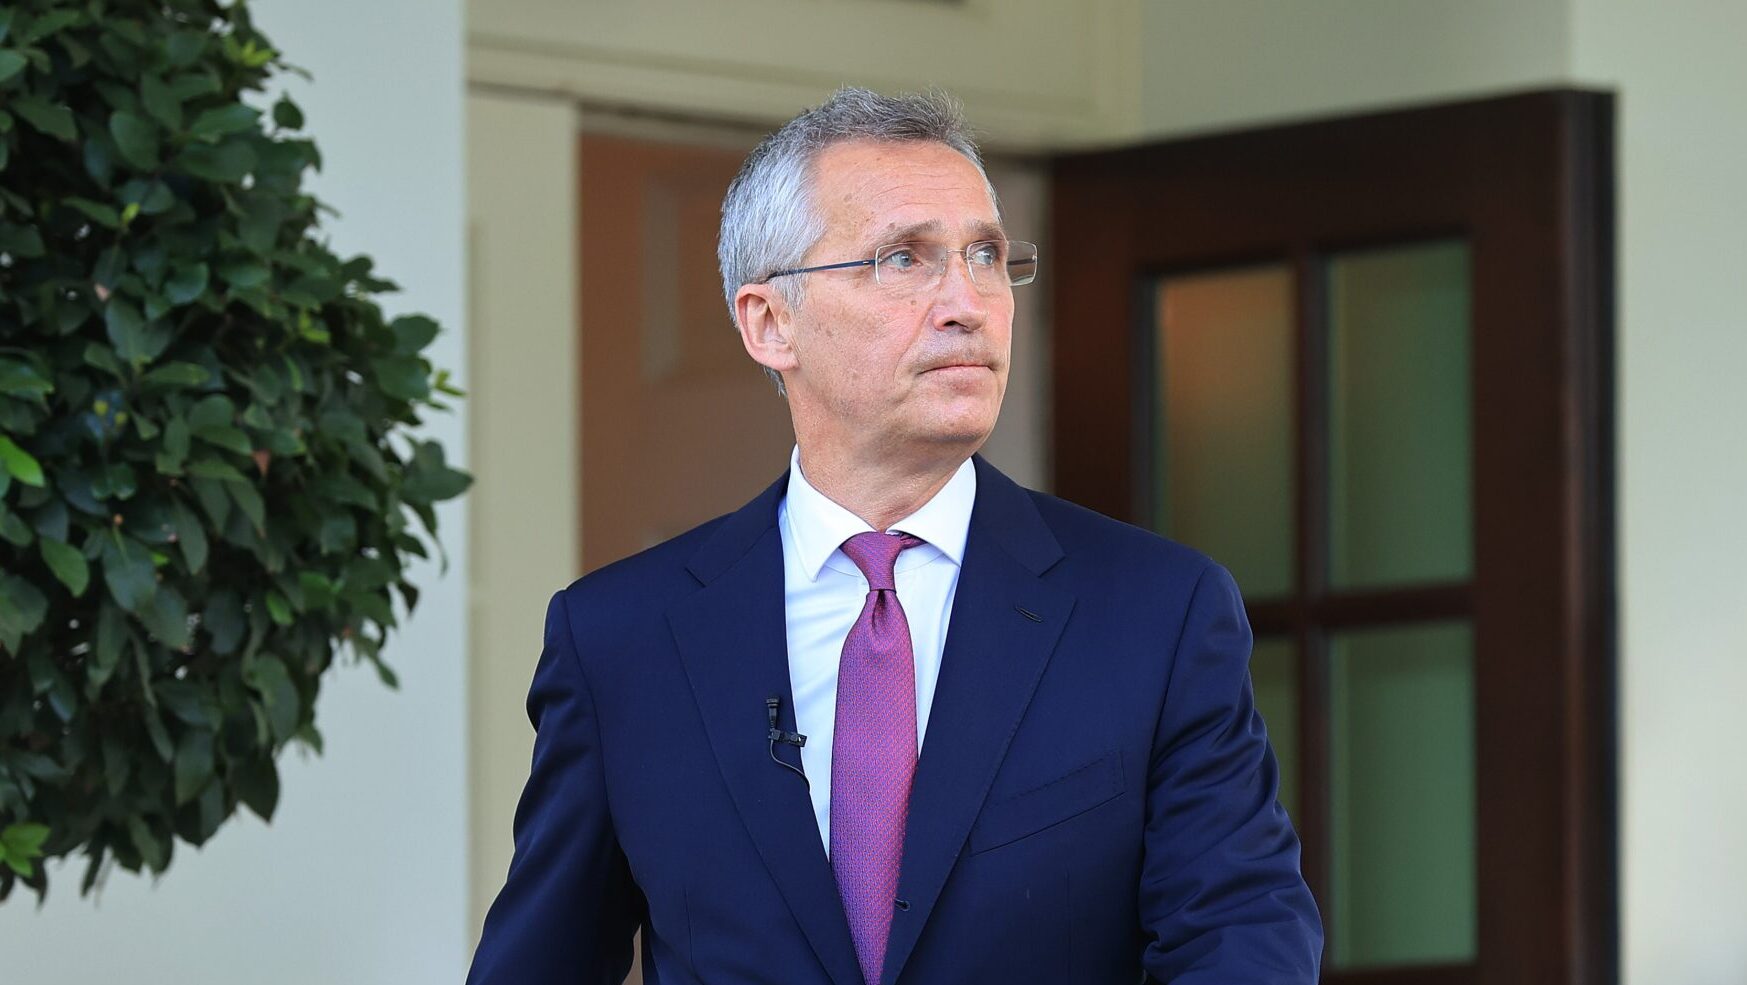 NATO Must ‘Step Up’ For Aspirant Members, Not Bow To Russia: Stoltenberg